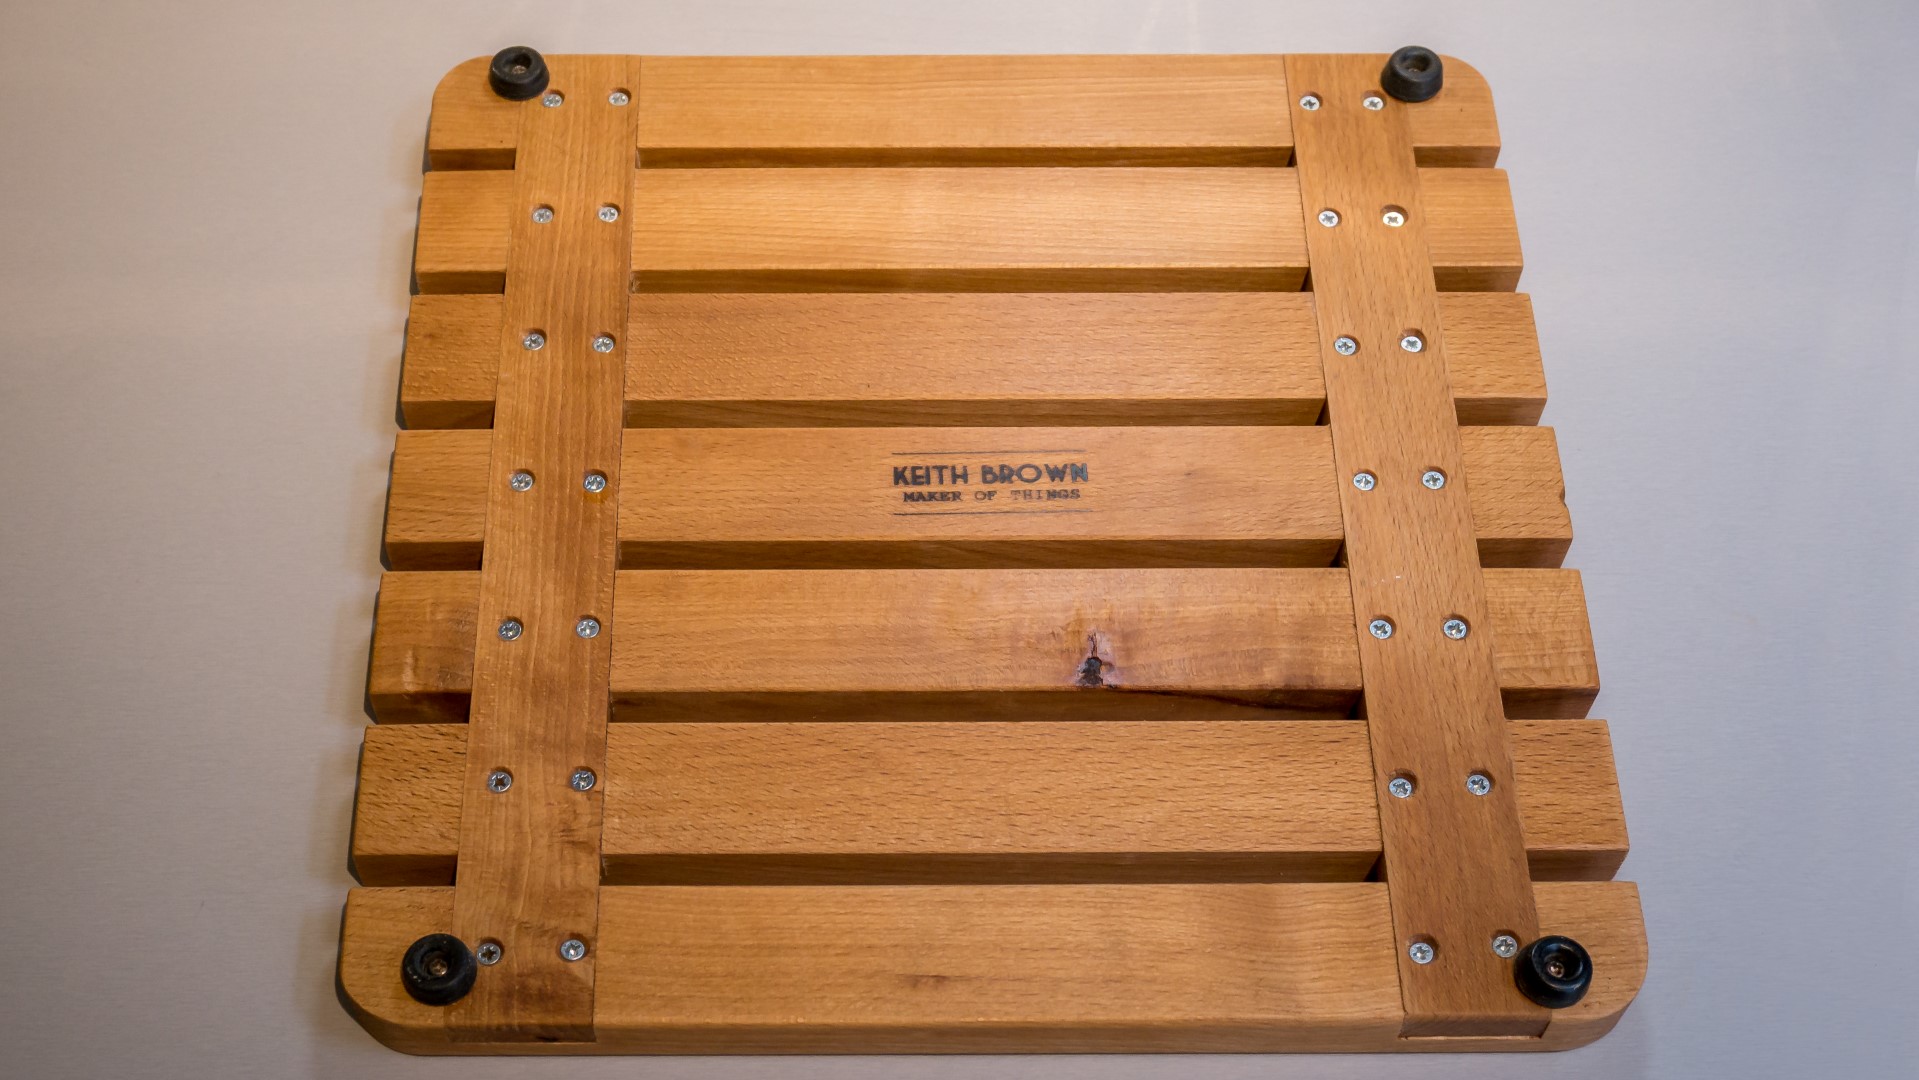 Wooden Draining Boards